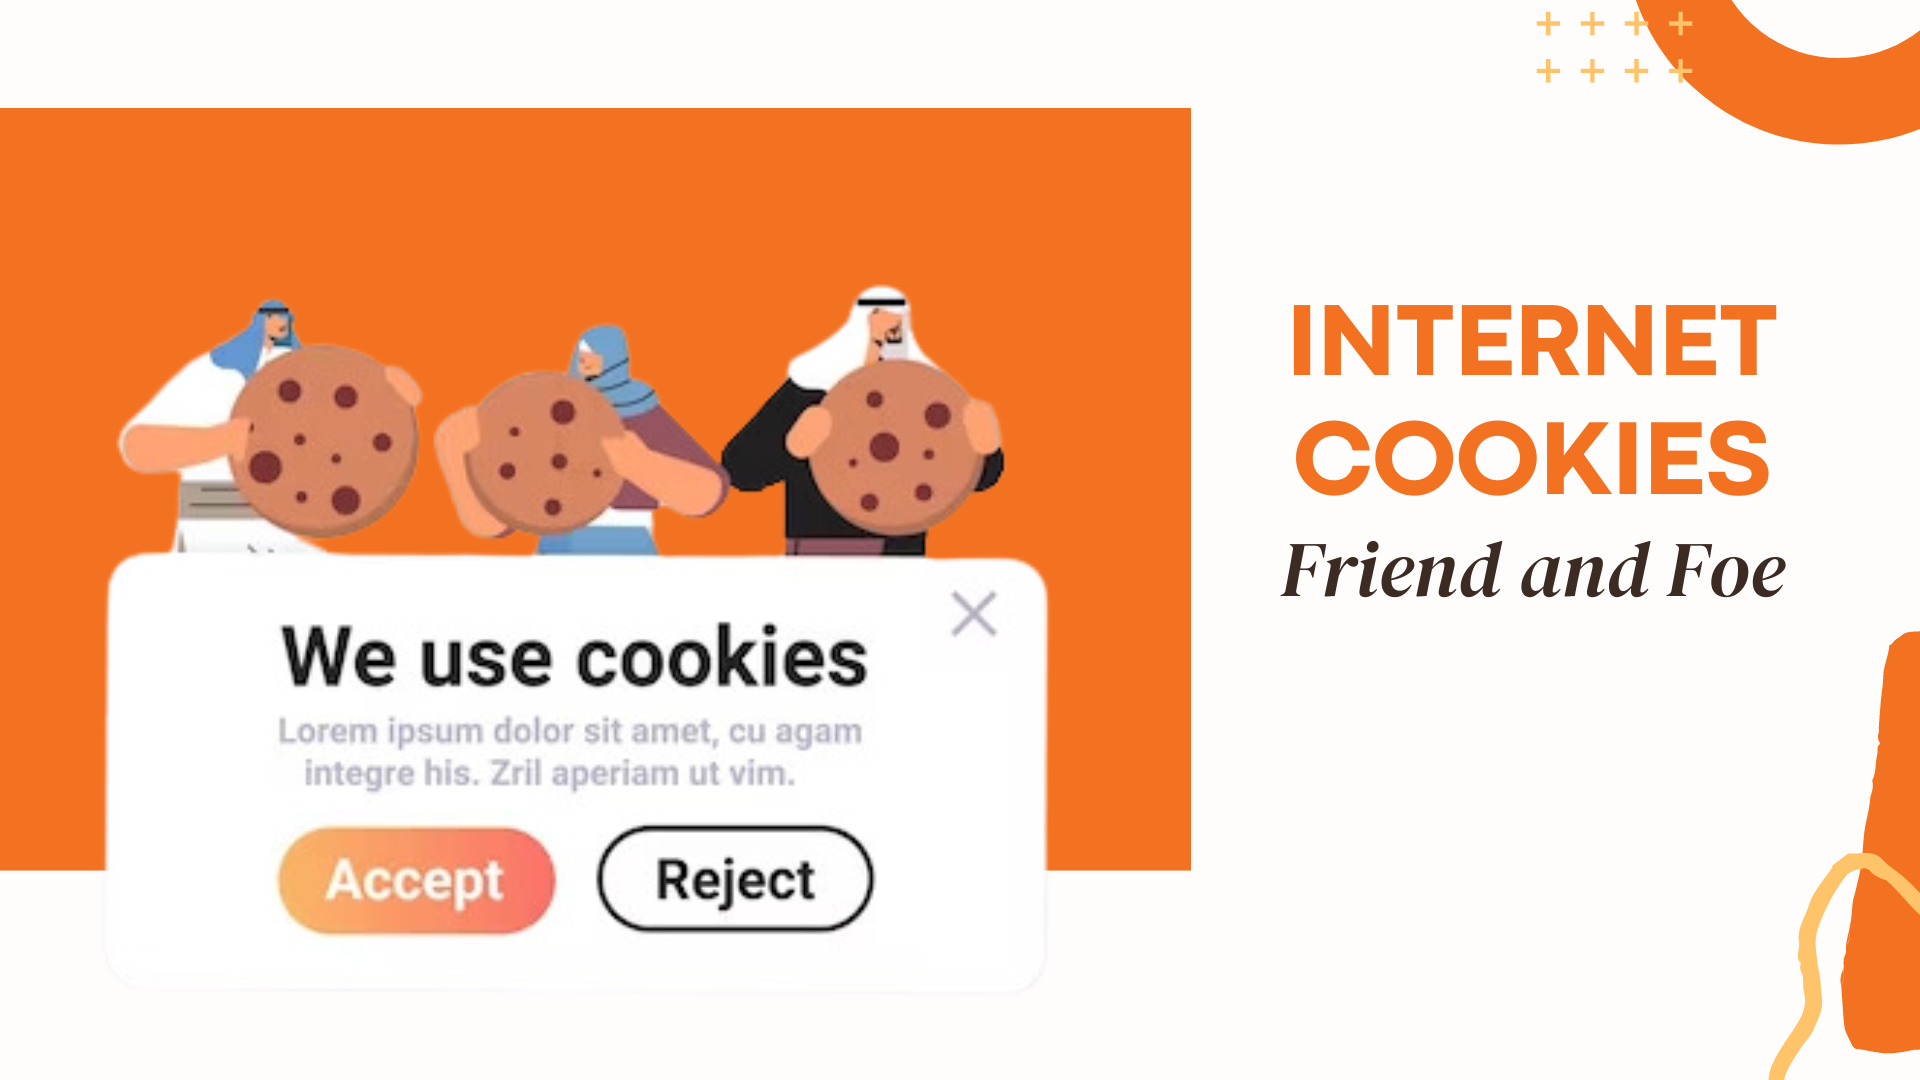 Internet Cookies : Friend and Foe? Guide Here!